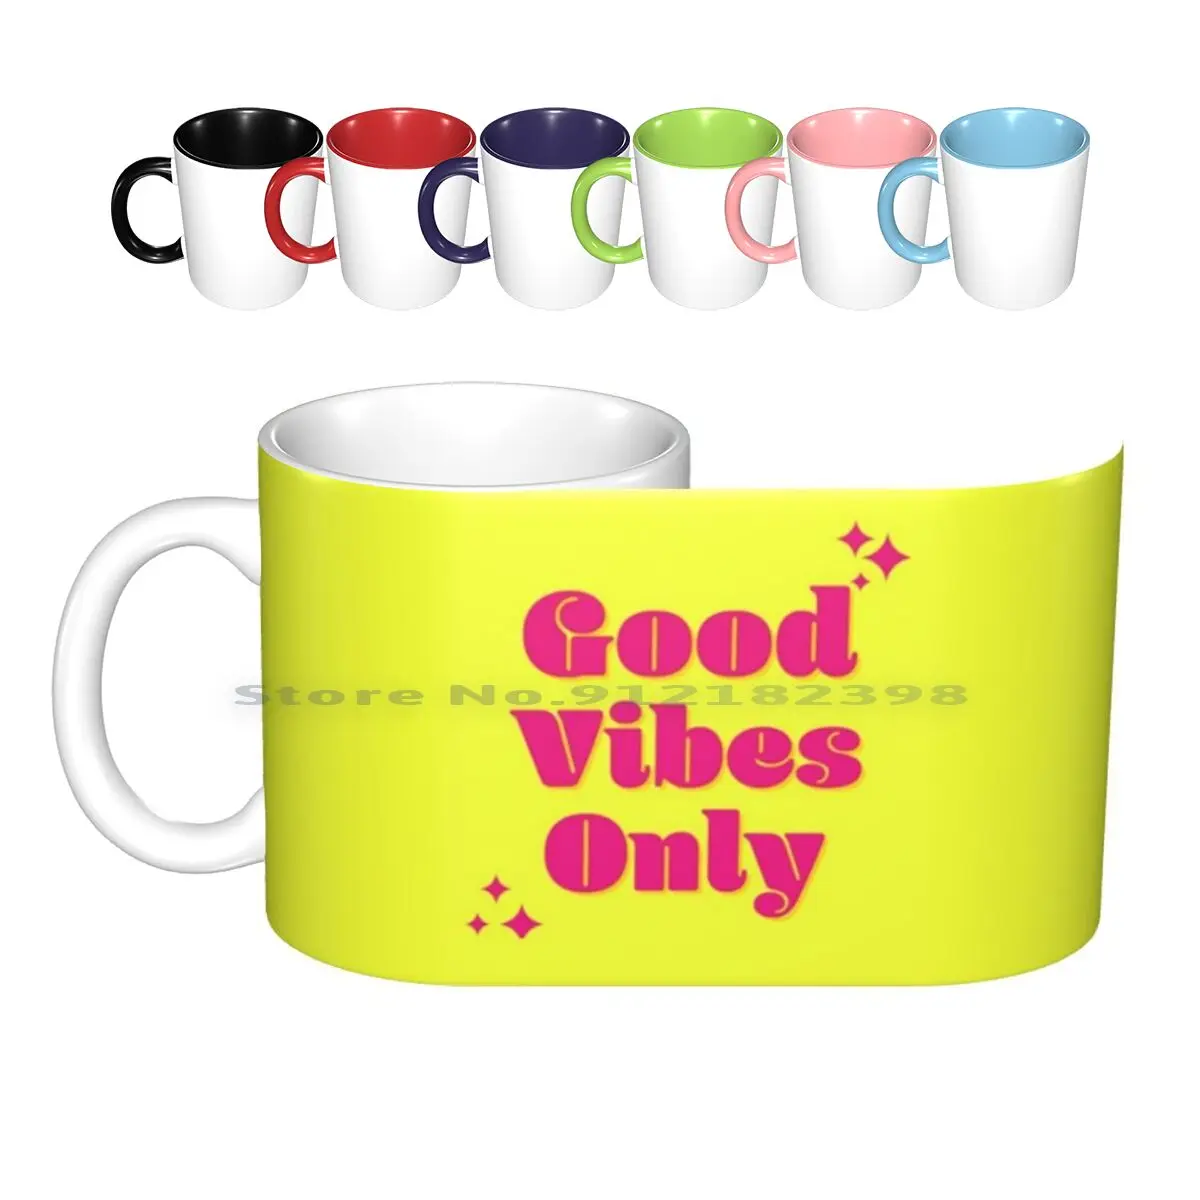 

Good Vibes Only Ceramic Mugs Coffee Cups Milk Tea Mug Good Vibes Happy Summer Cute Vibes Happiness Positive Quotes Yellow Sun